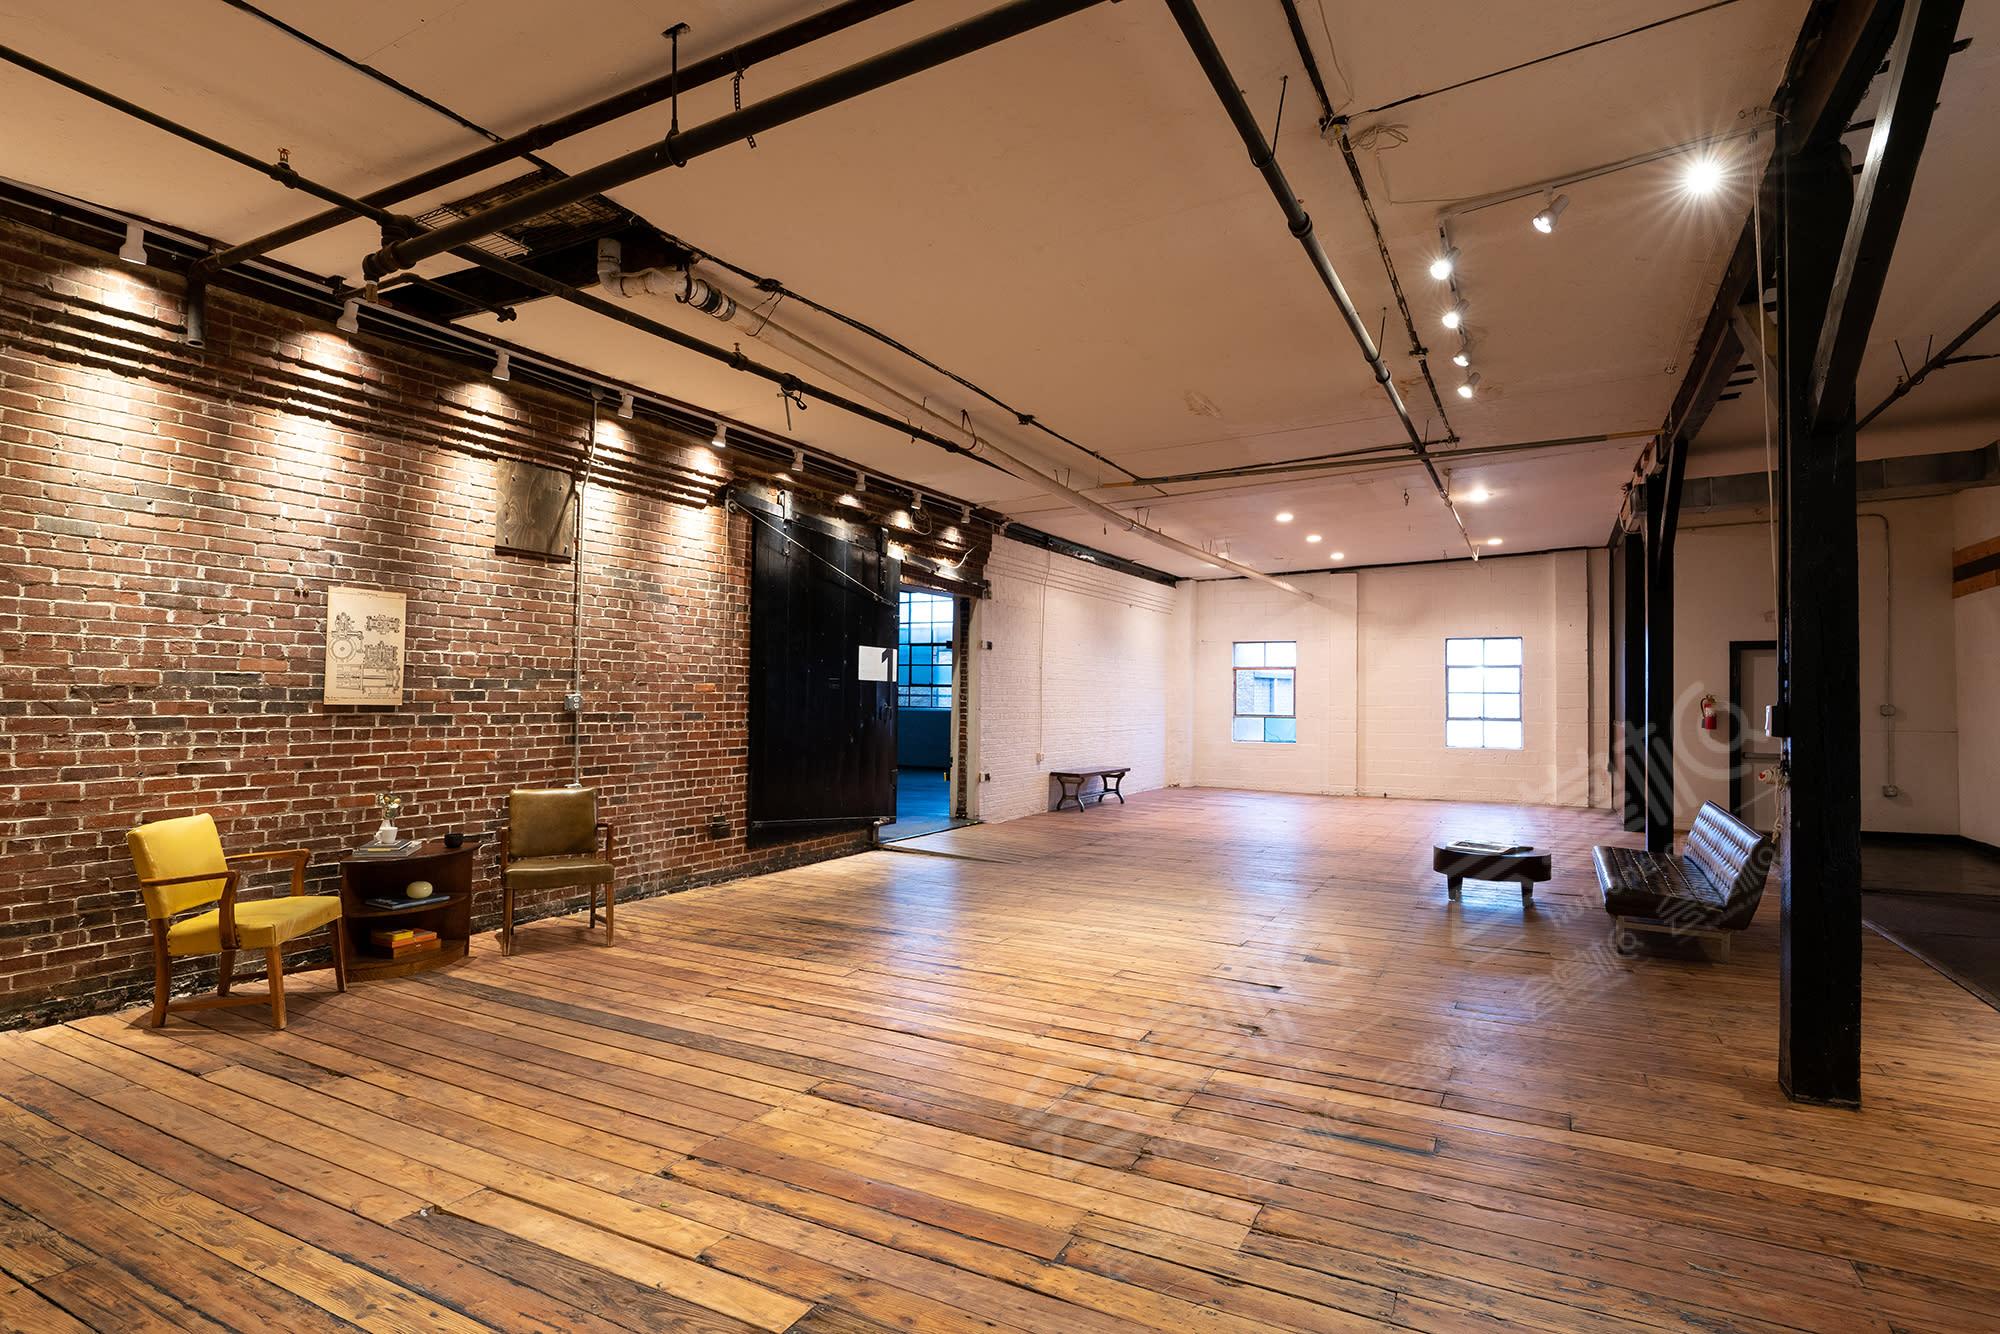 Downtown Historic Factory Complex Turned Film & Photo Studio with Hardwood Floors and Natural Light